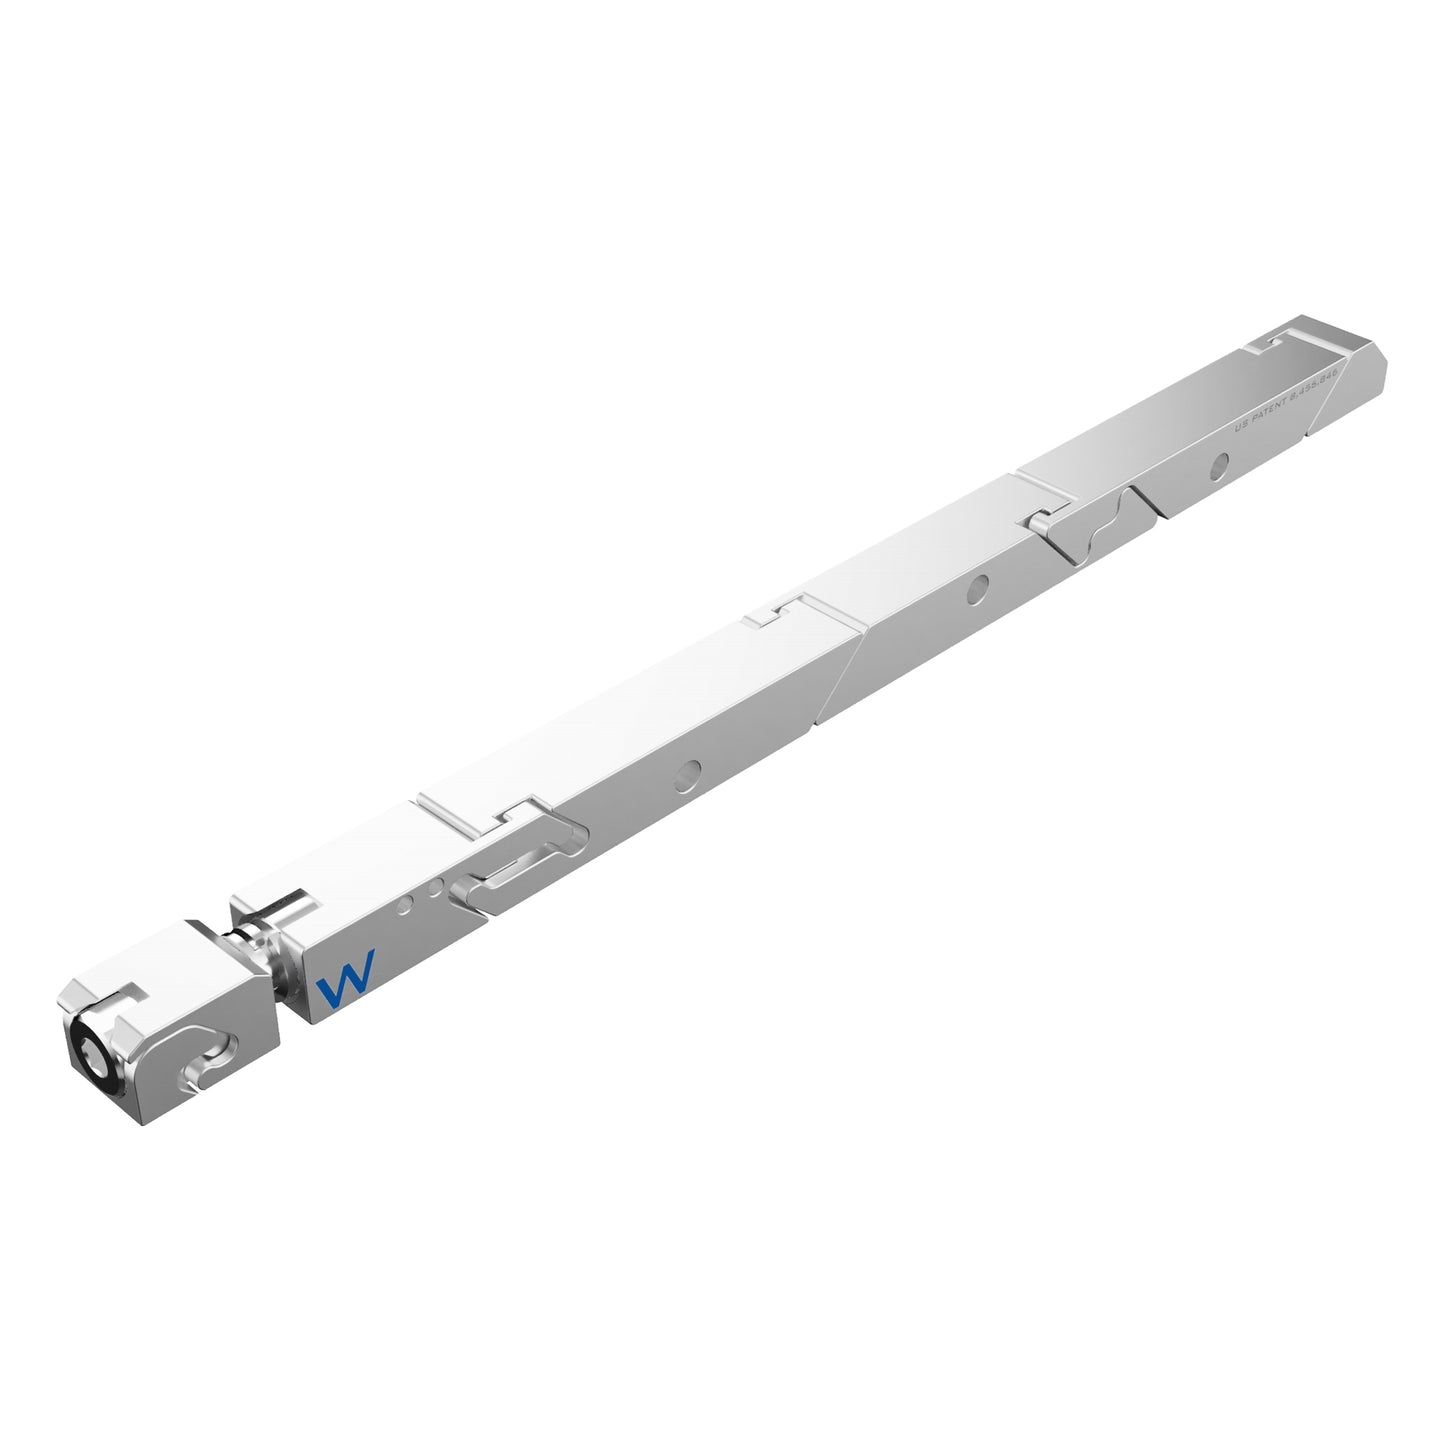 SW7-475-250-300 High Force #6 Wedgelock, segmented long rectulangular hardware component, Clear Chemical Film Finish